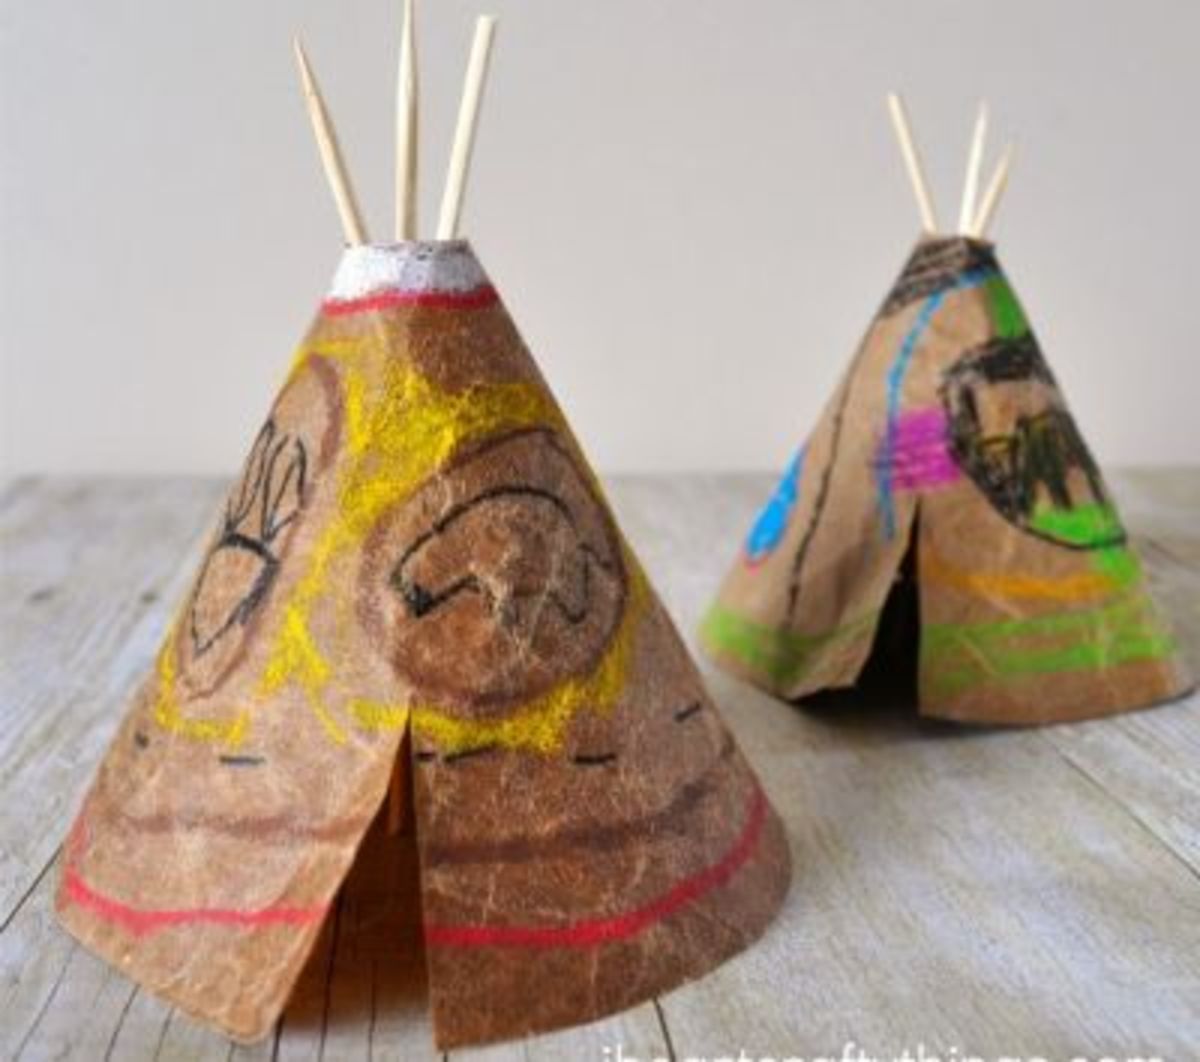 native-american-indian-crafts